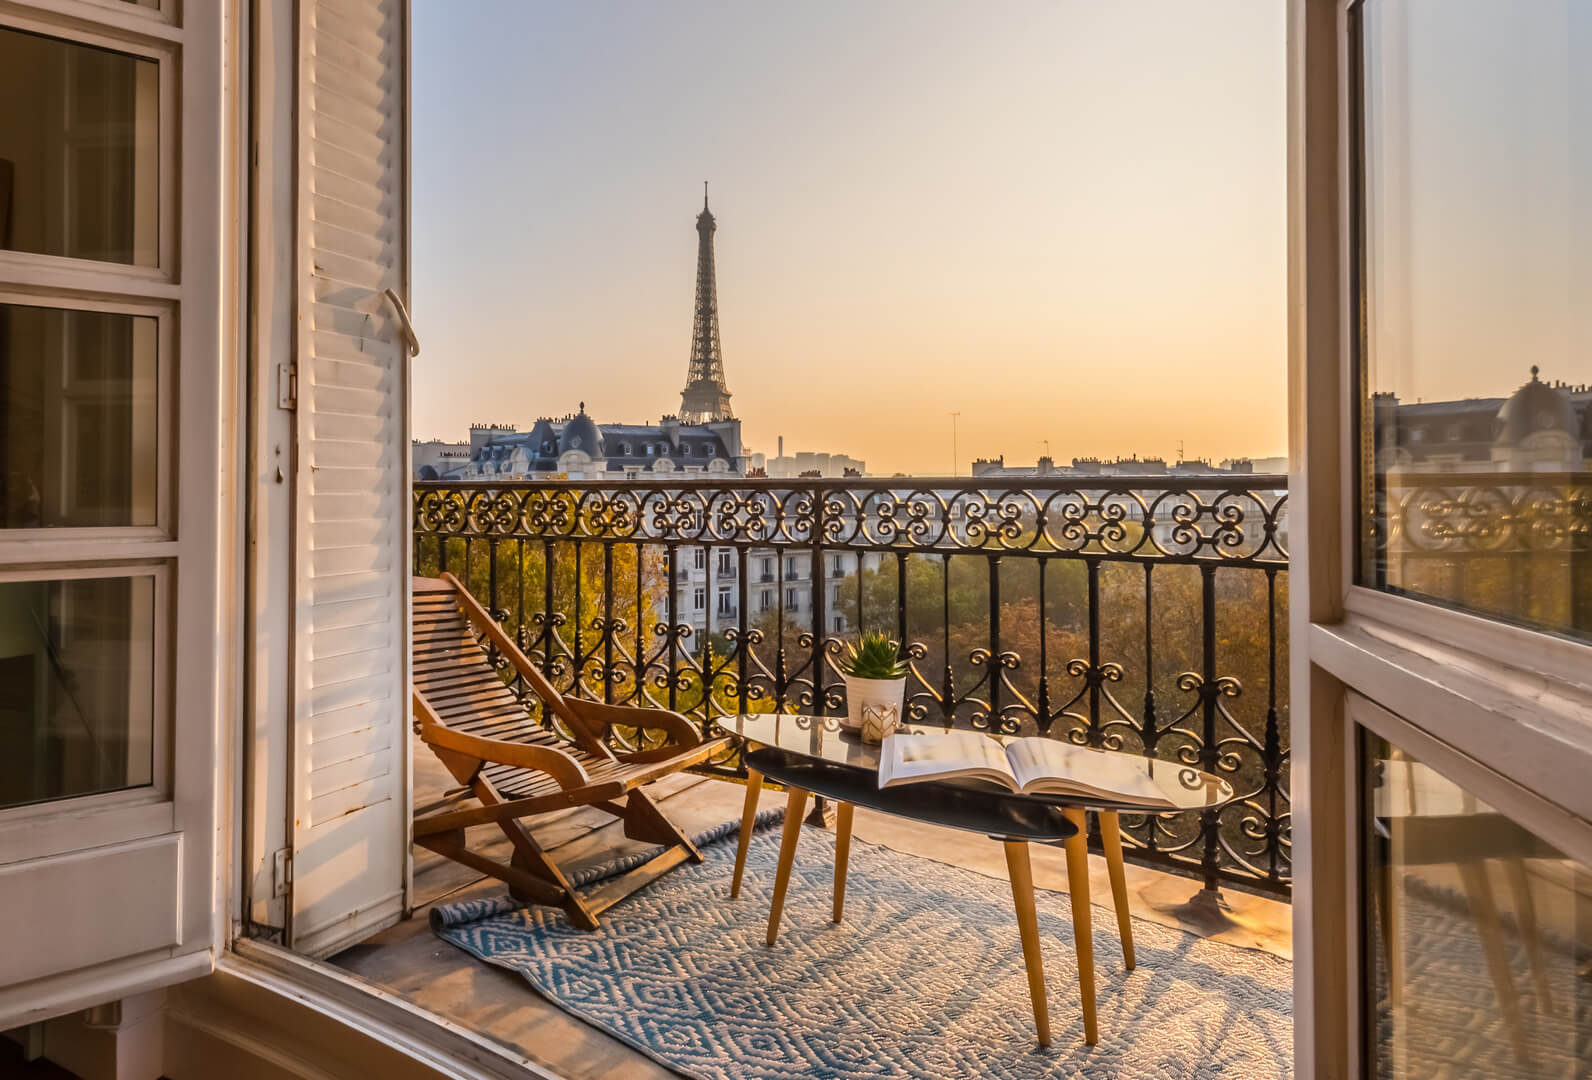 paris balcony with a splendid view of the eiffel tower at sunset